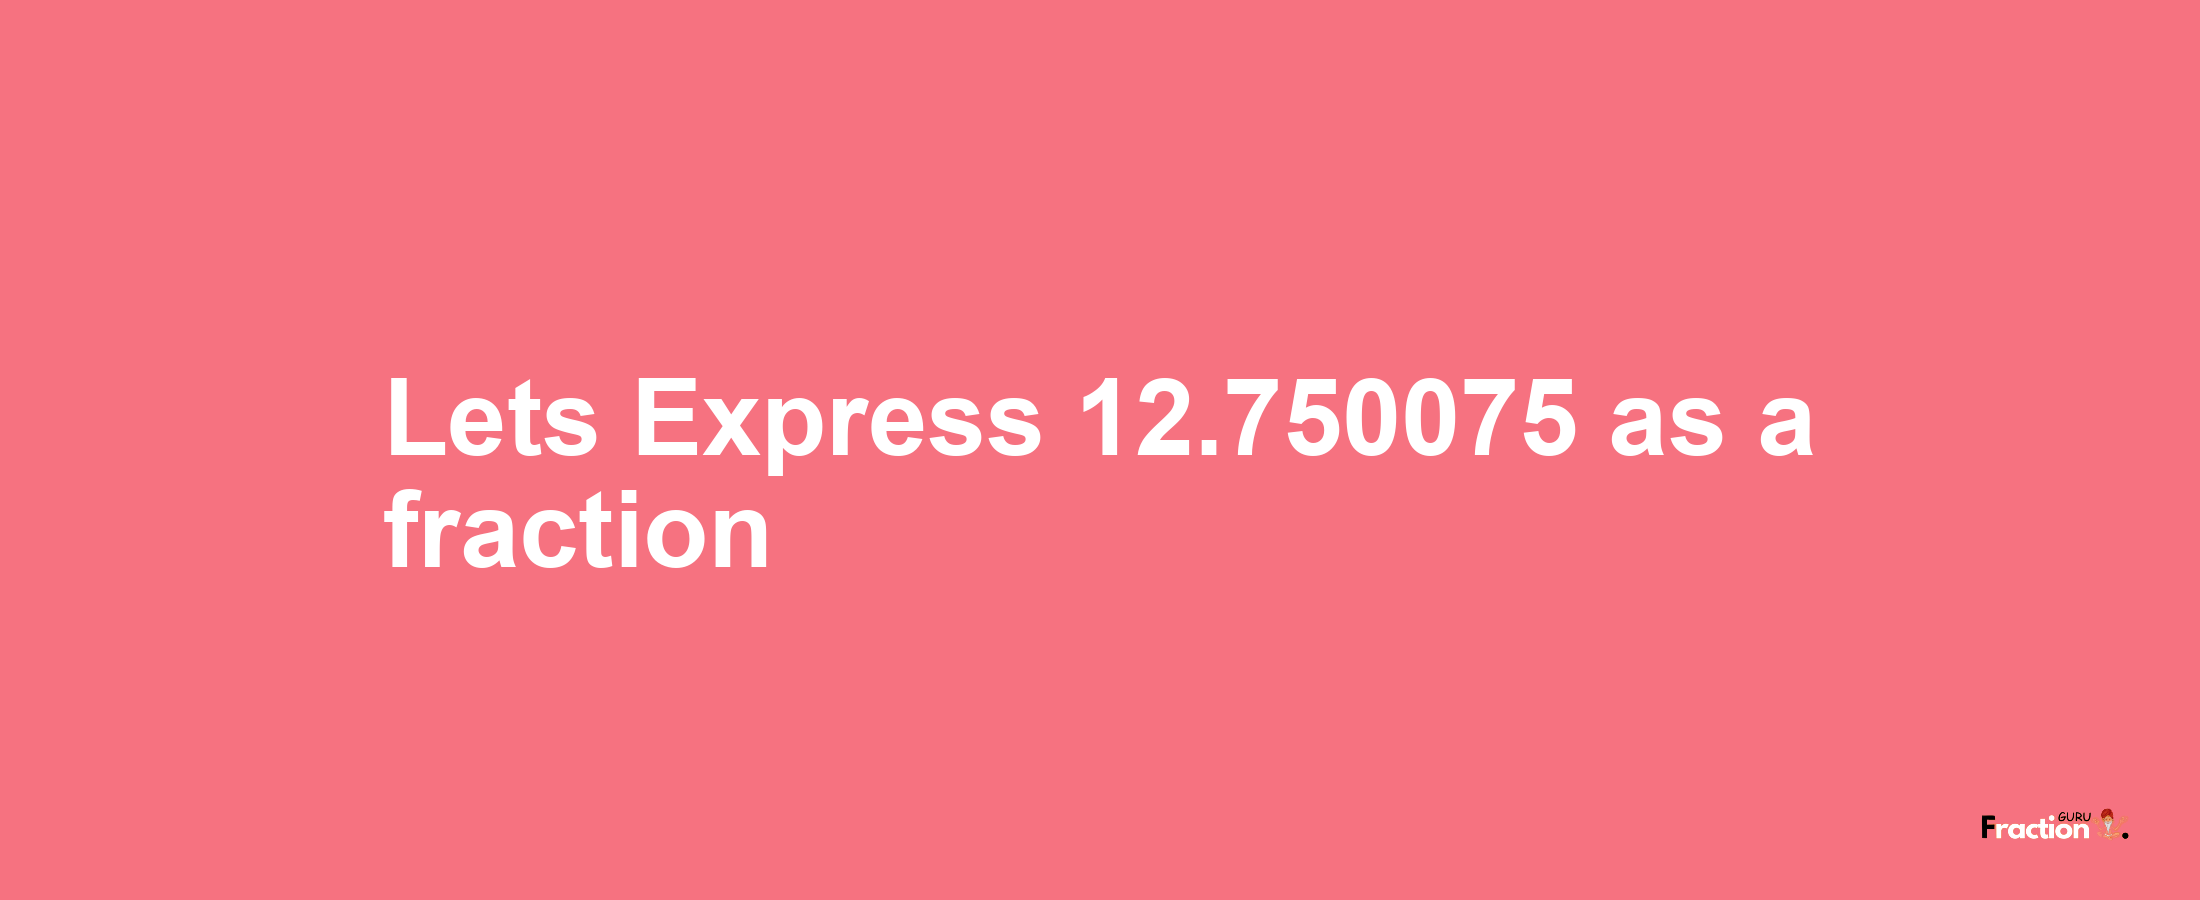 Lets Express 12.750075 as afraction